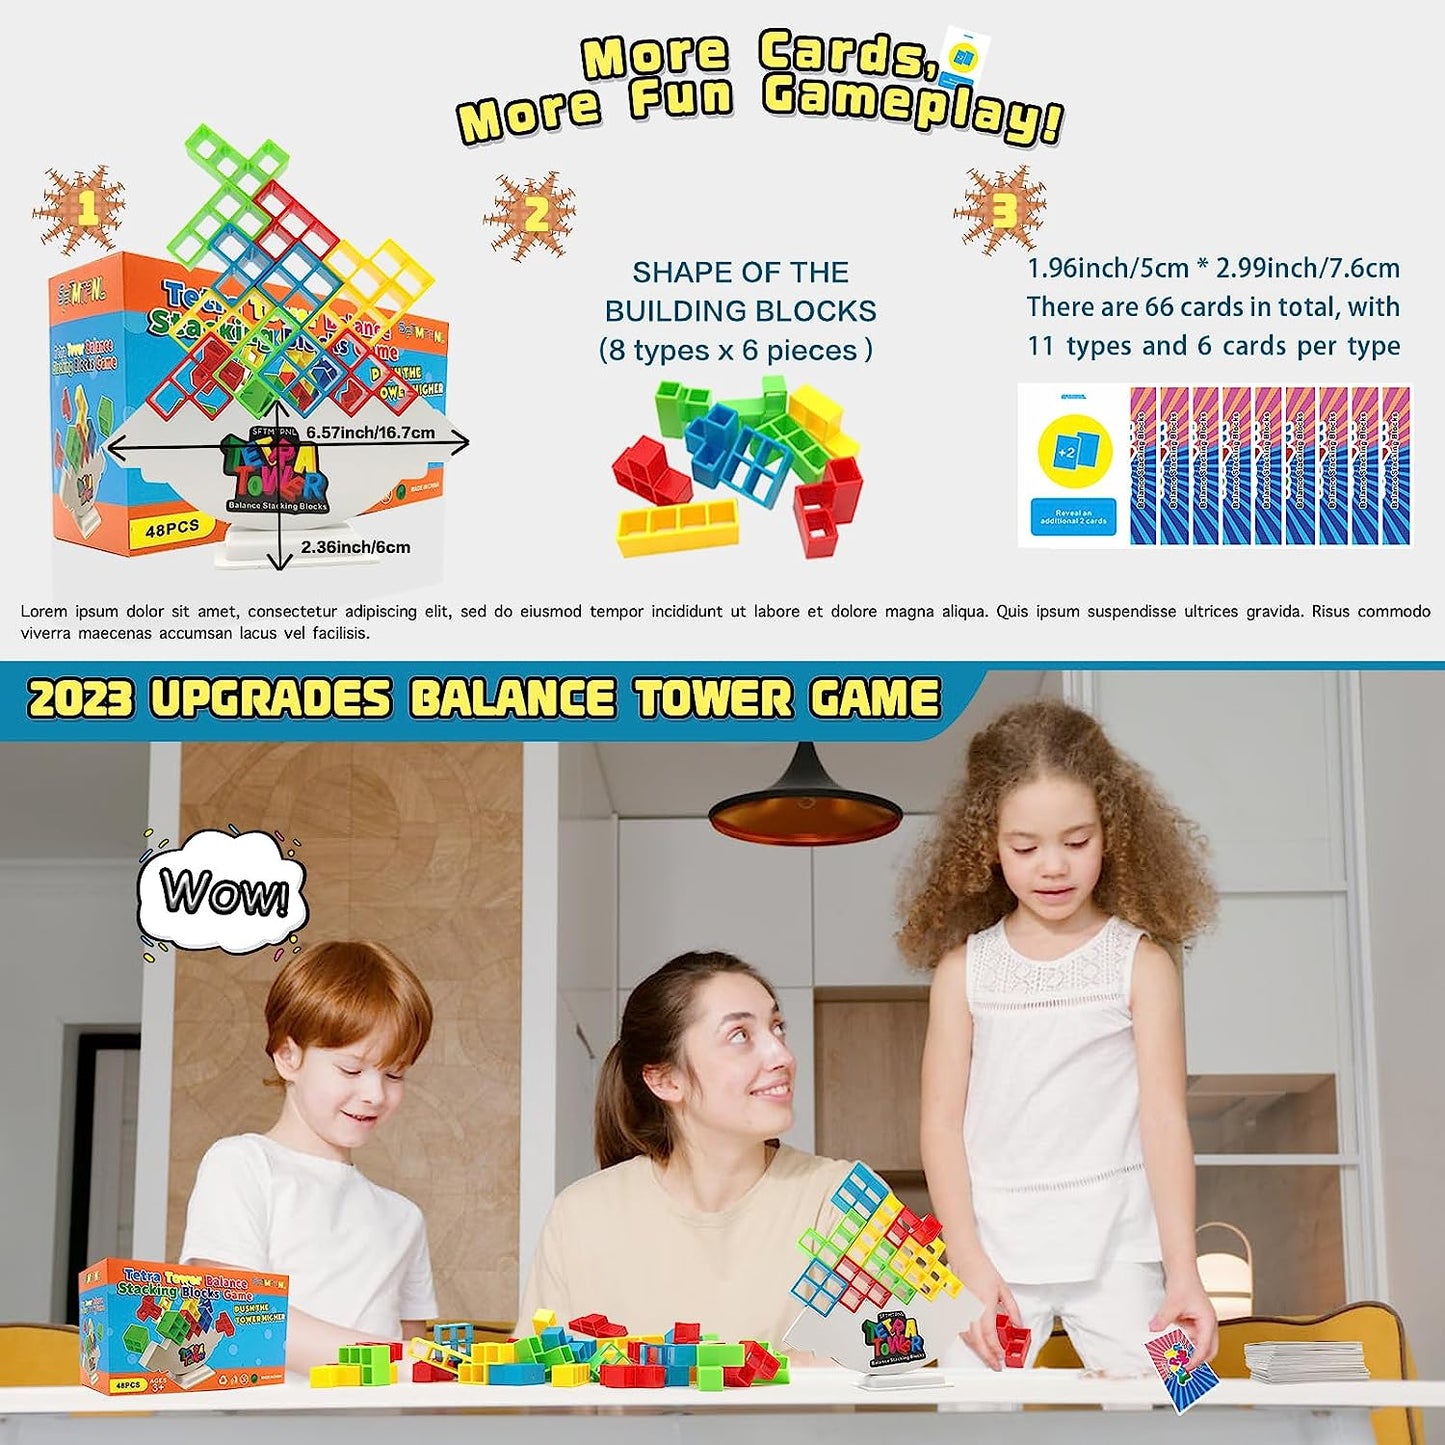 48 Pcs Tetra Tower Game Balance Stacking Block Party Game Tetratower Game for Adults Kids Tetra Board Game 2 Players or More Family Games Parties Travel Team Building Games Toy